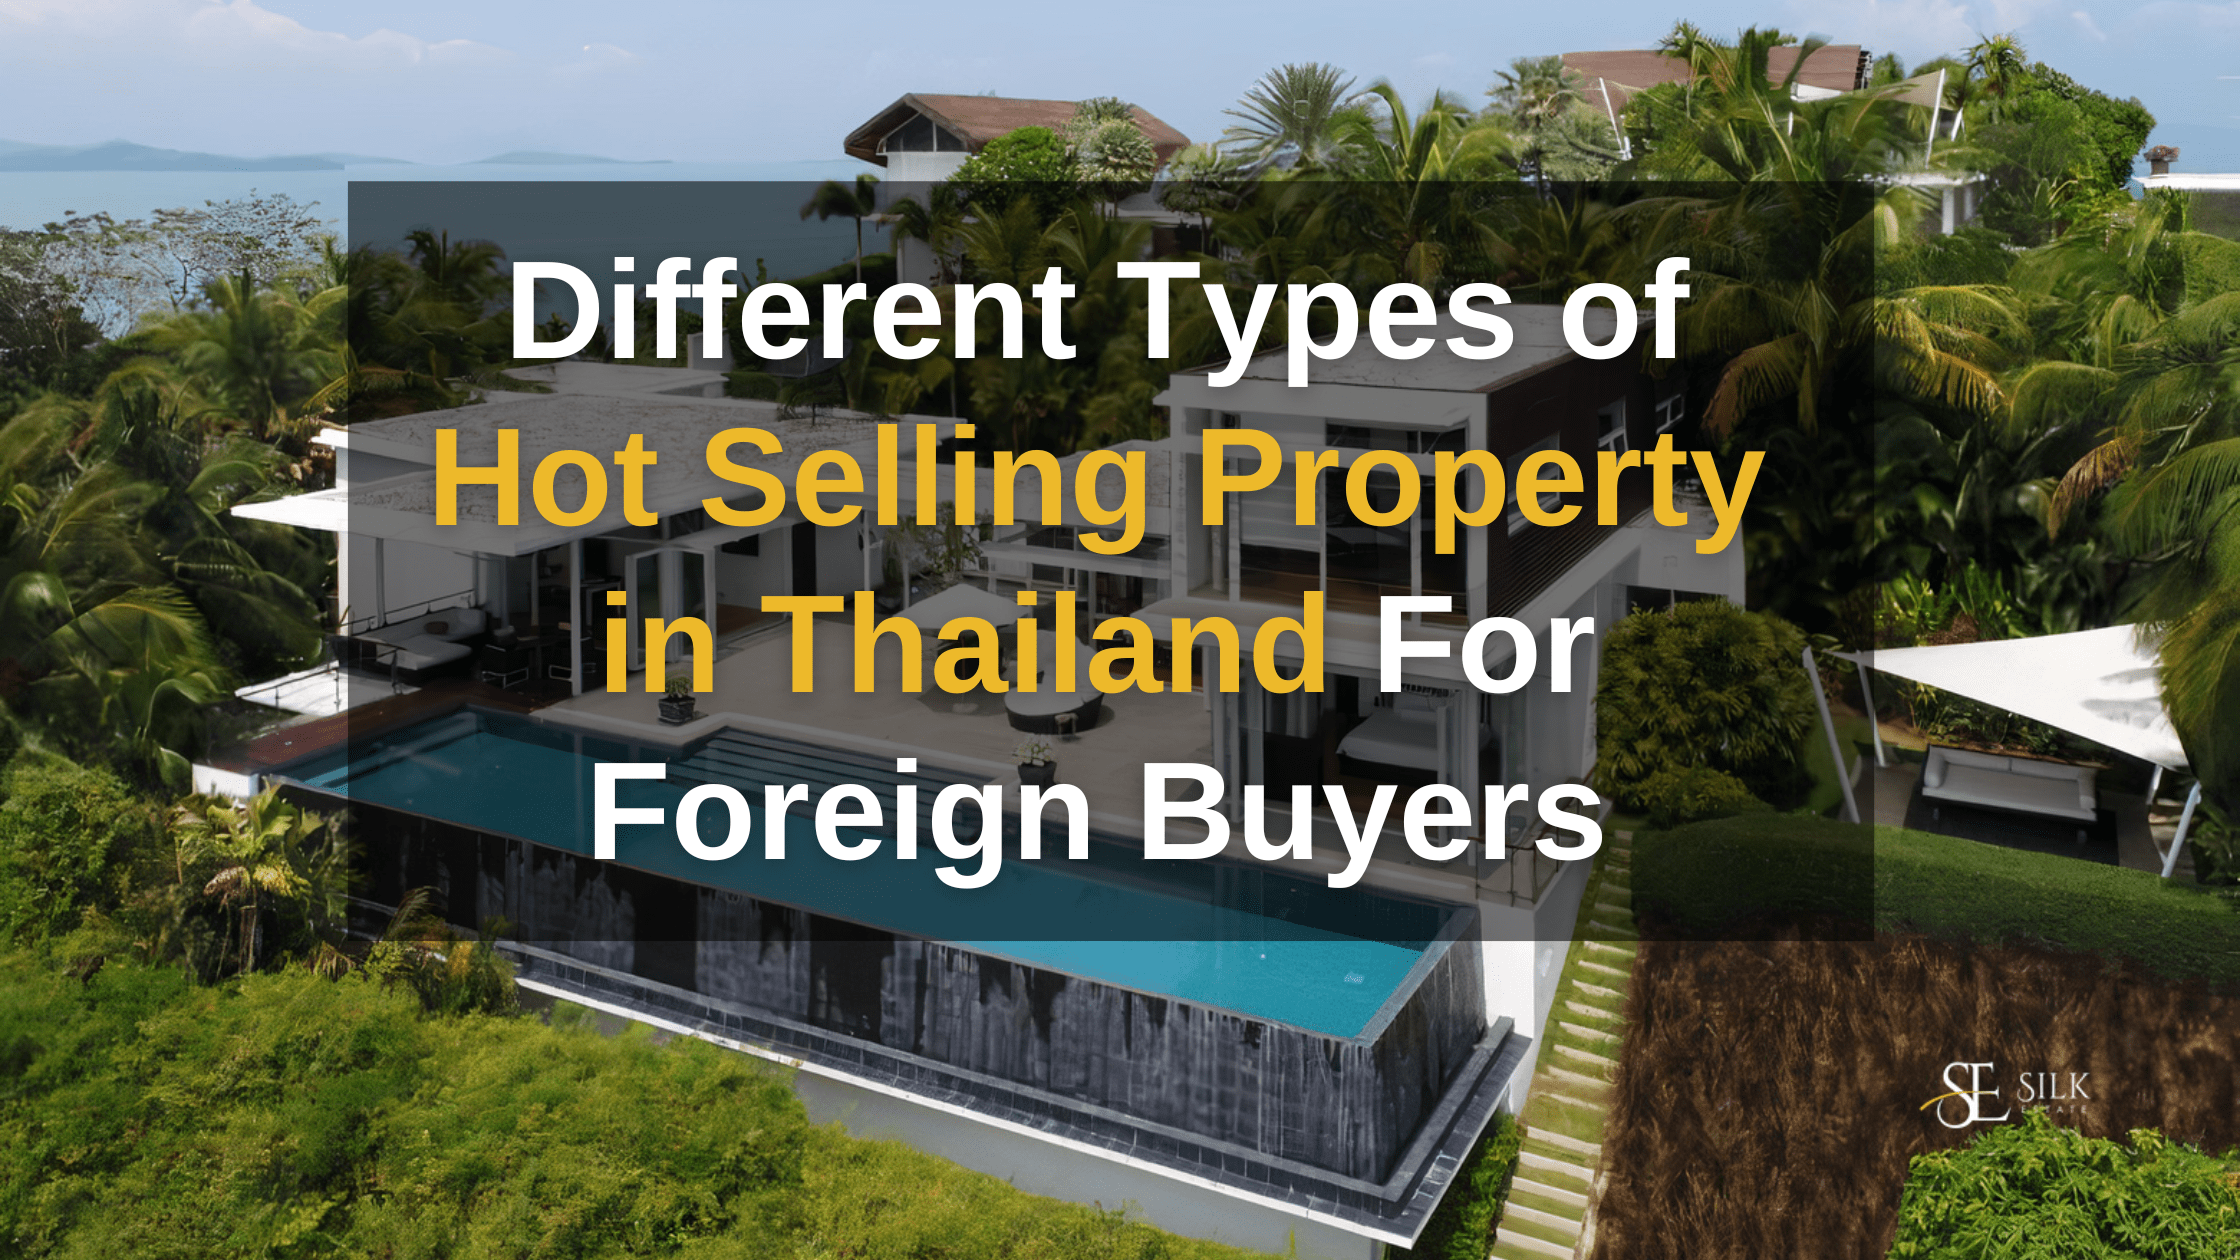 Types of Hot Selling Property in Thailand For Foreign Buyers